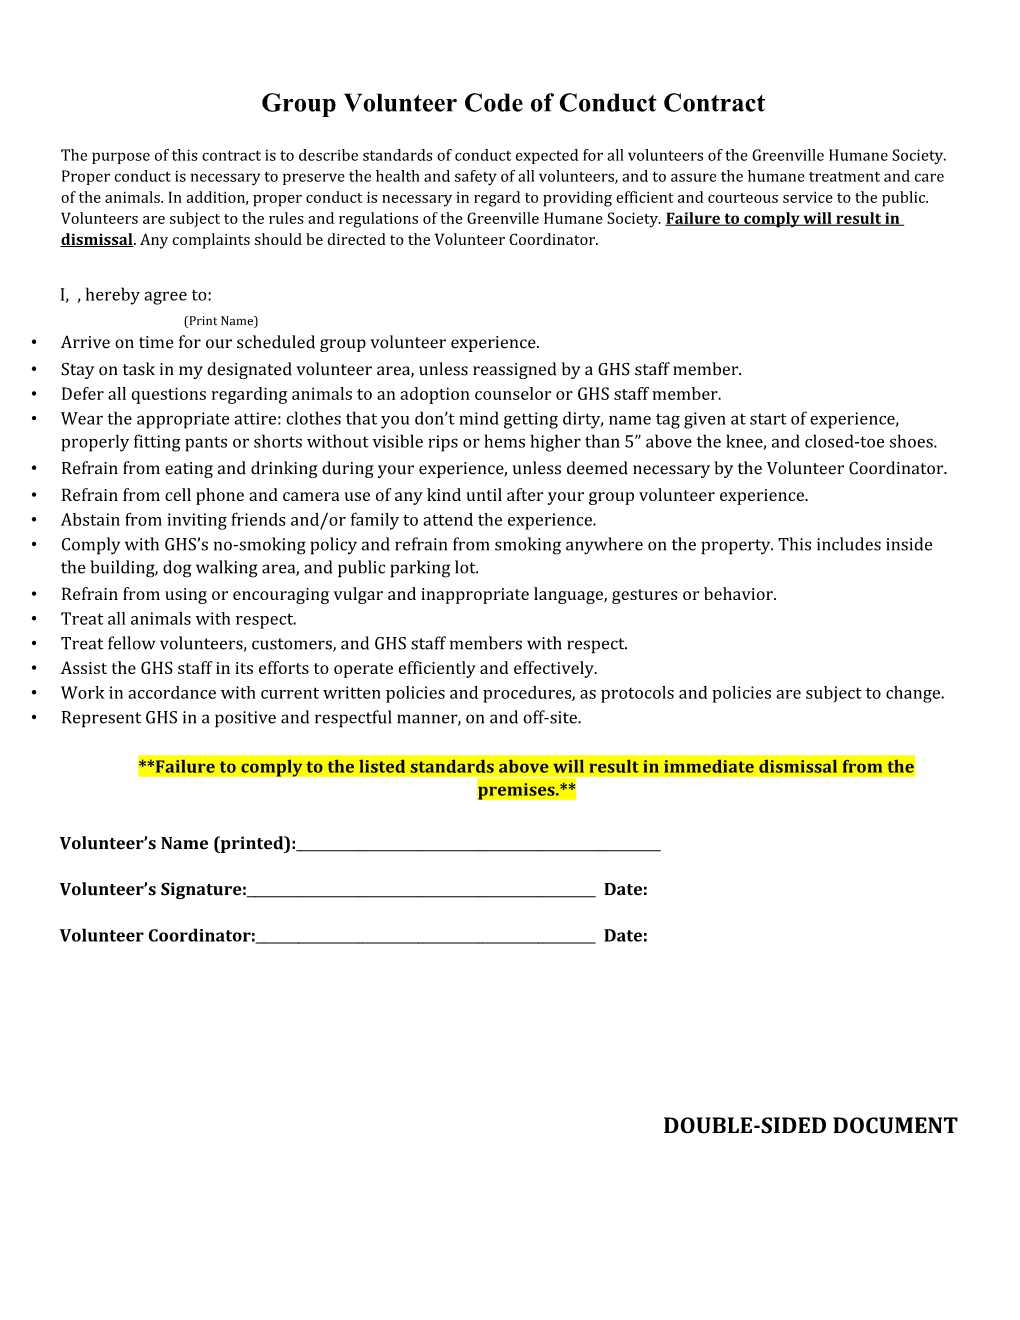 Group Volunteer Code of Conduct Contract